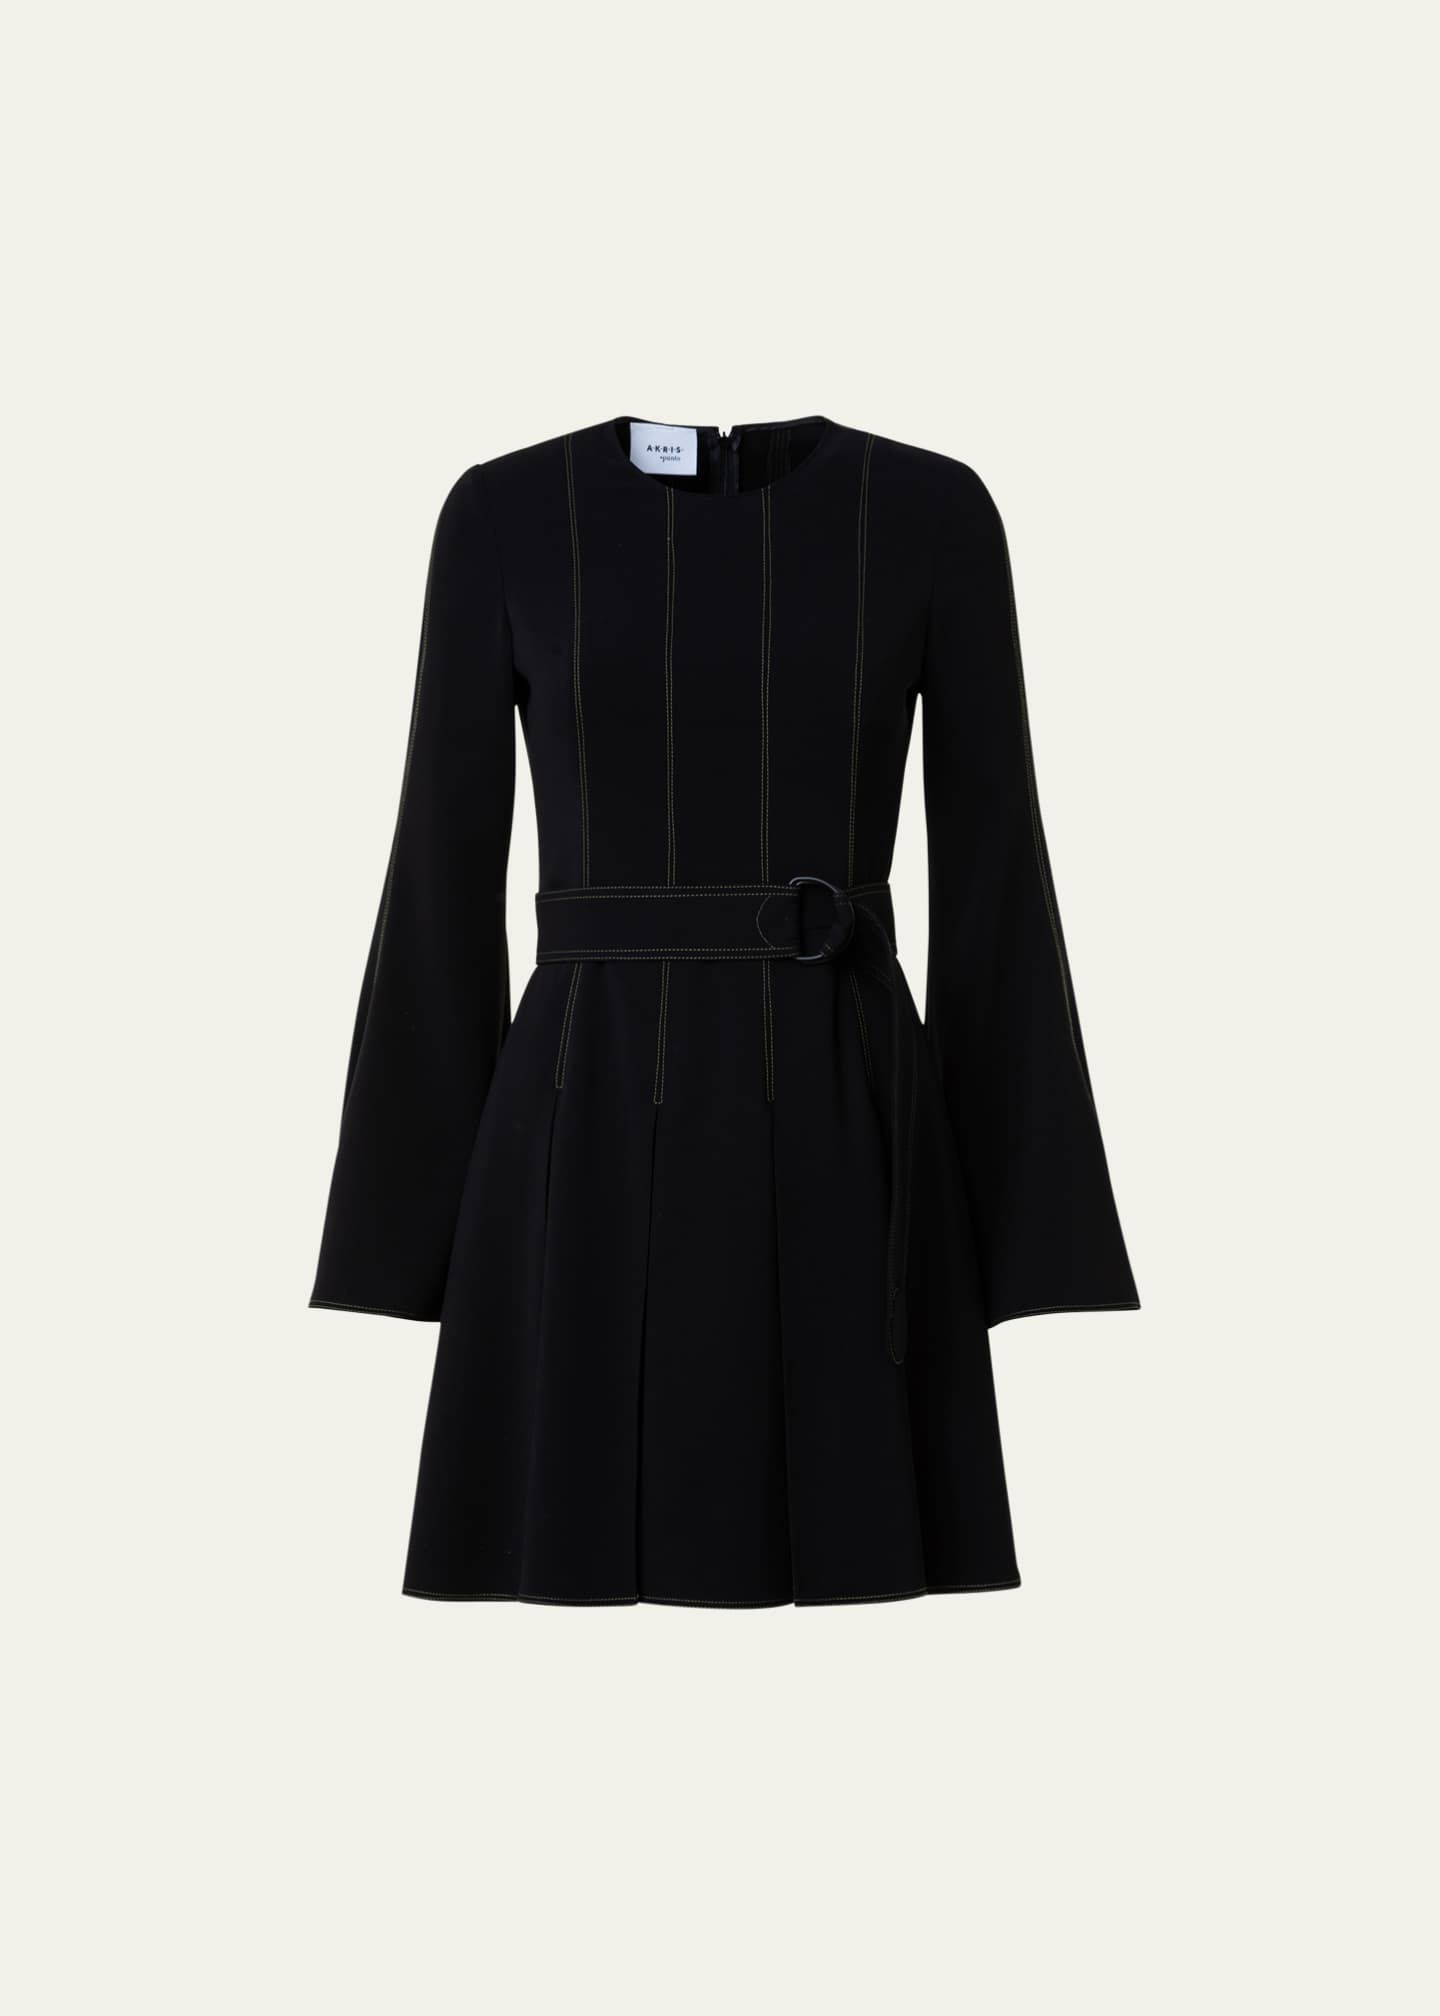 Akris punto Belted Short Dress with Pleated Skirt - Bergdorf Goodman